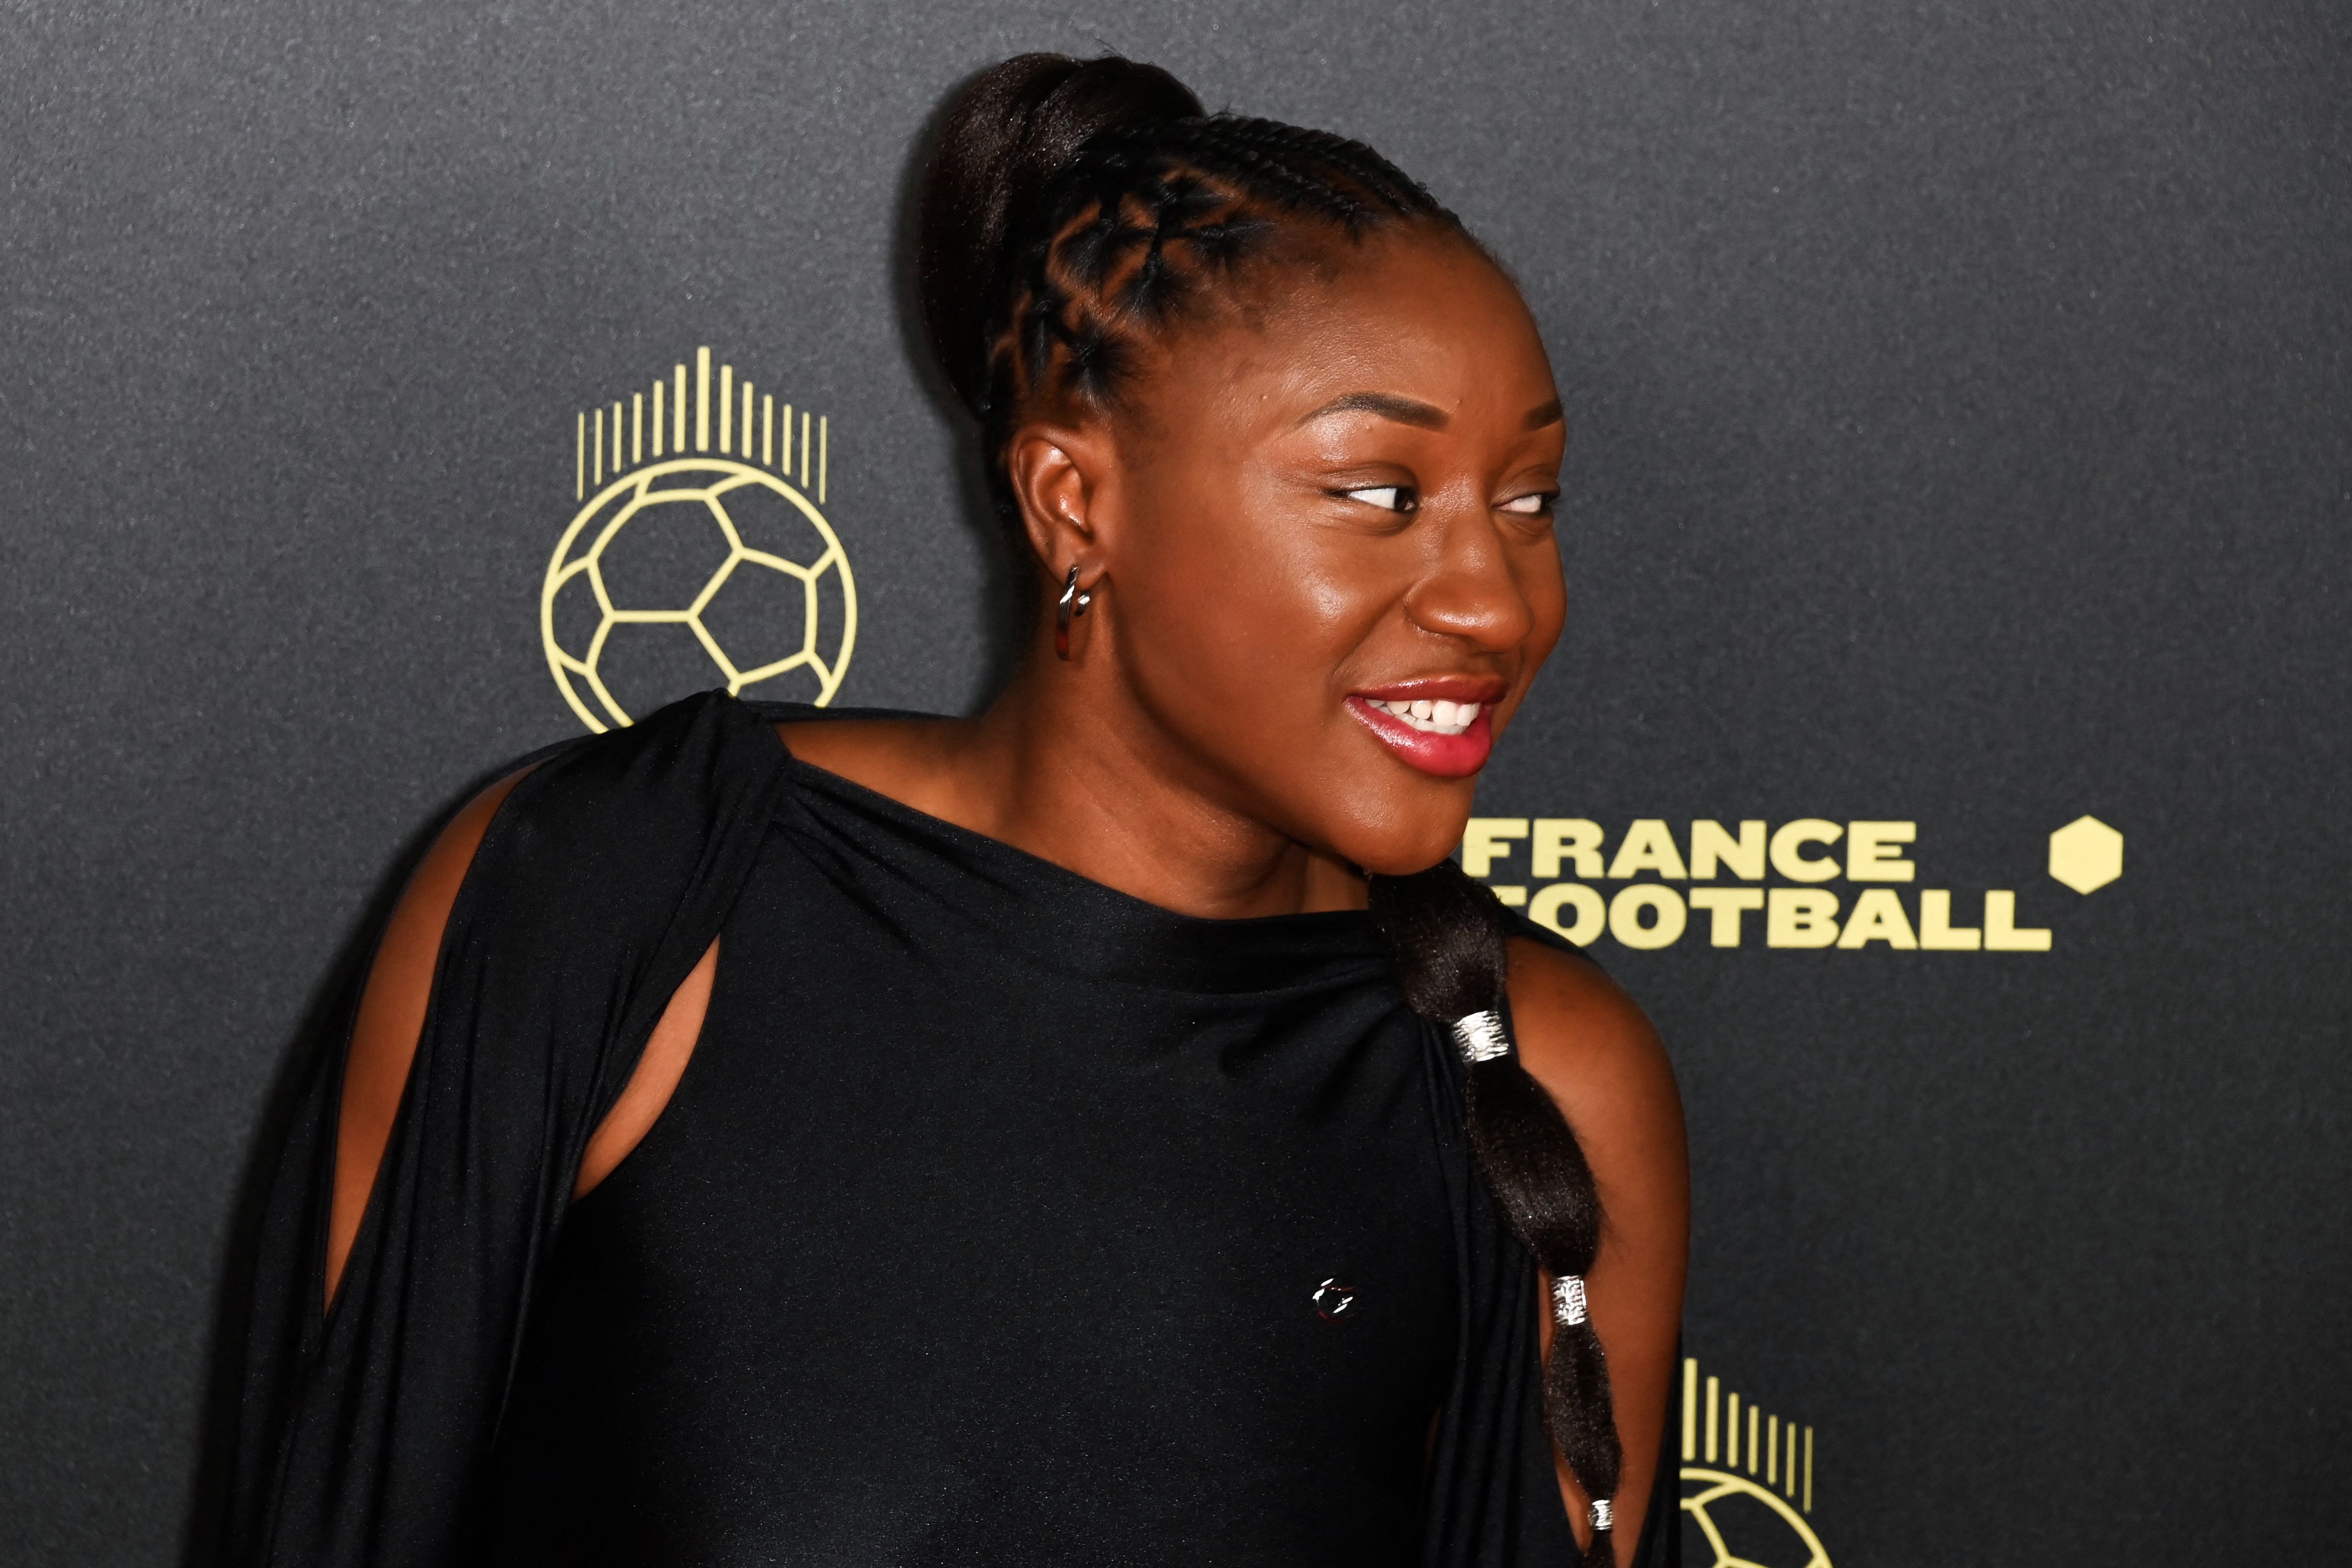 Kadidiatou Diani poses upon arrival to attend the Ballon d'Or France Football award ceremony